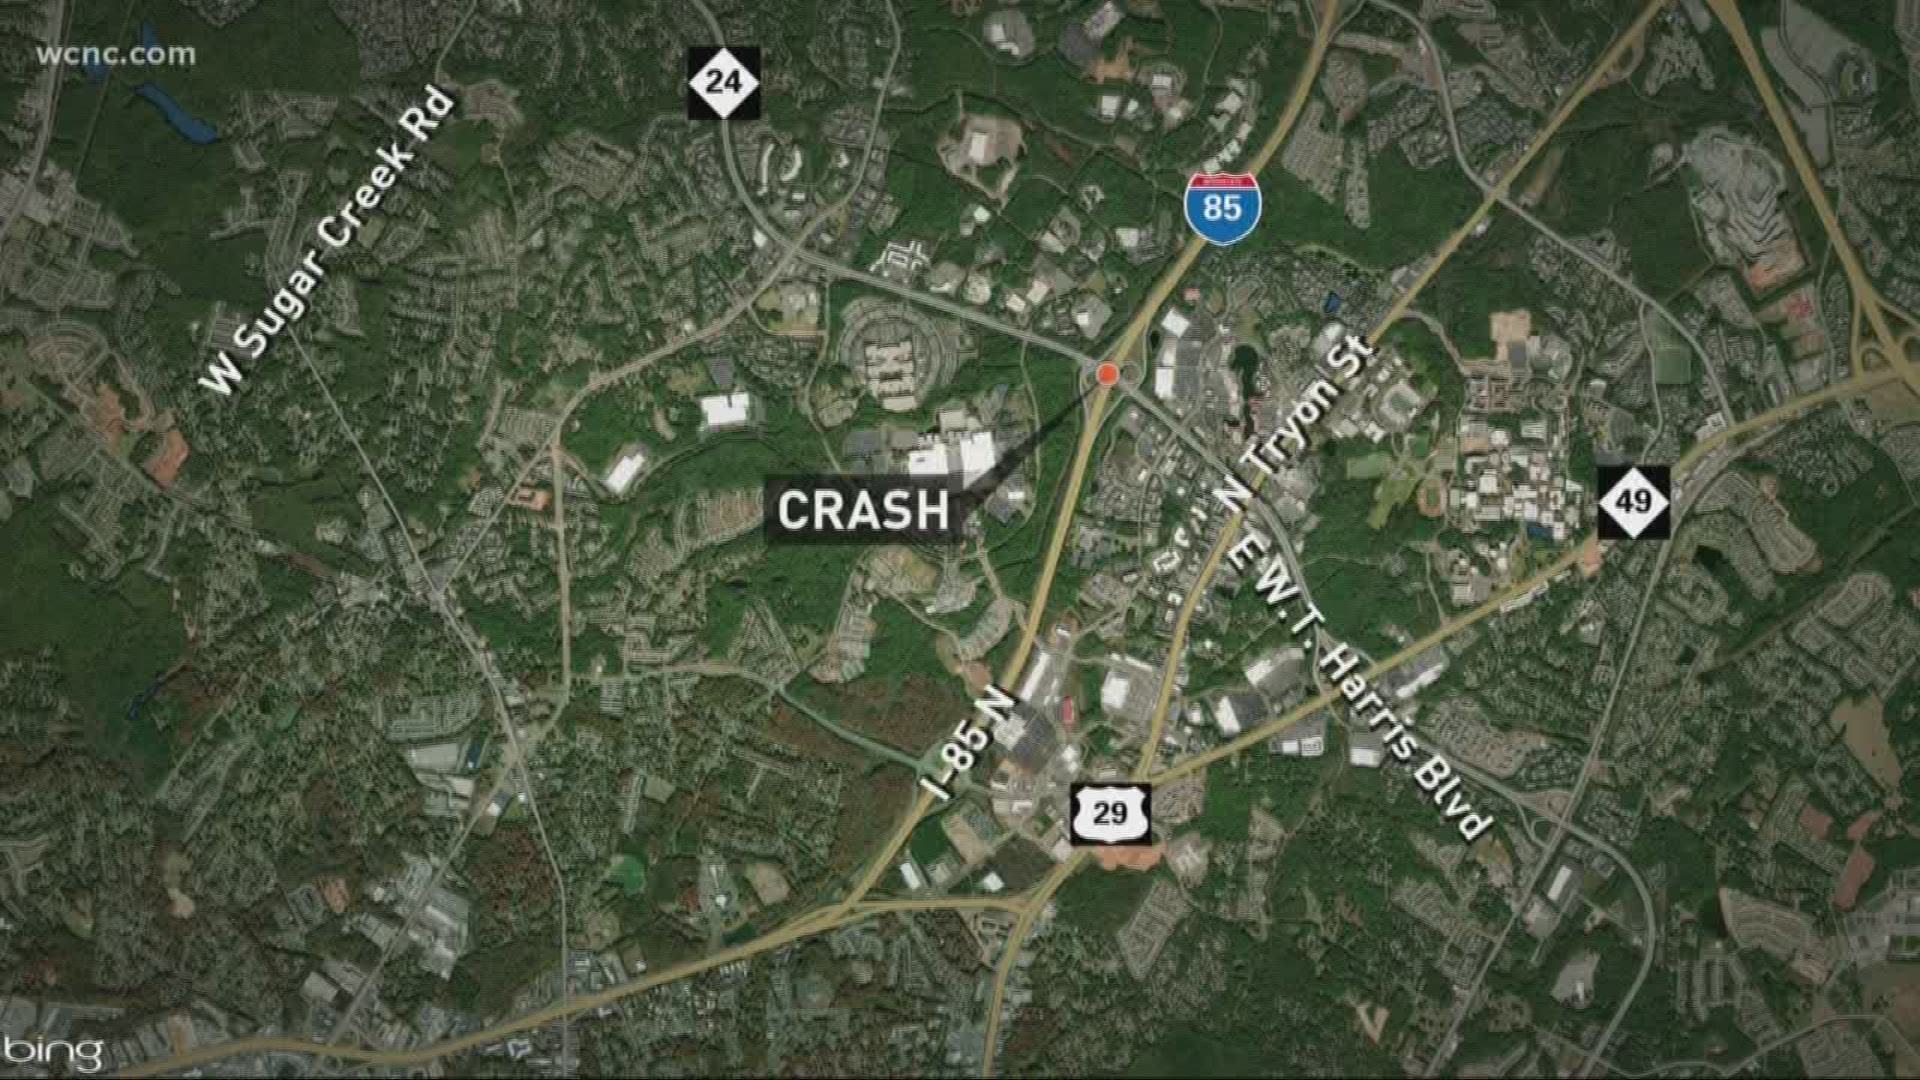 Police are investigating a crash on I-85 near W.T. Harris that closed the road for hours. WCNC is told multiple vehicles were involved, and five were injured -- three with life-threatening injuries.